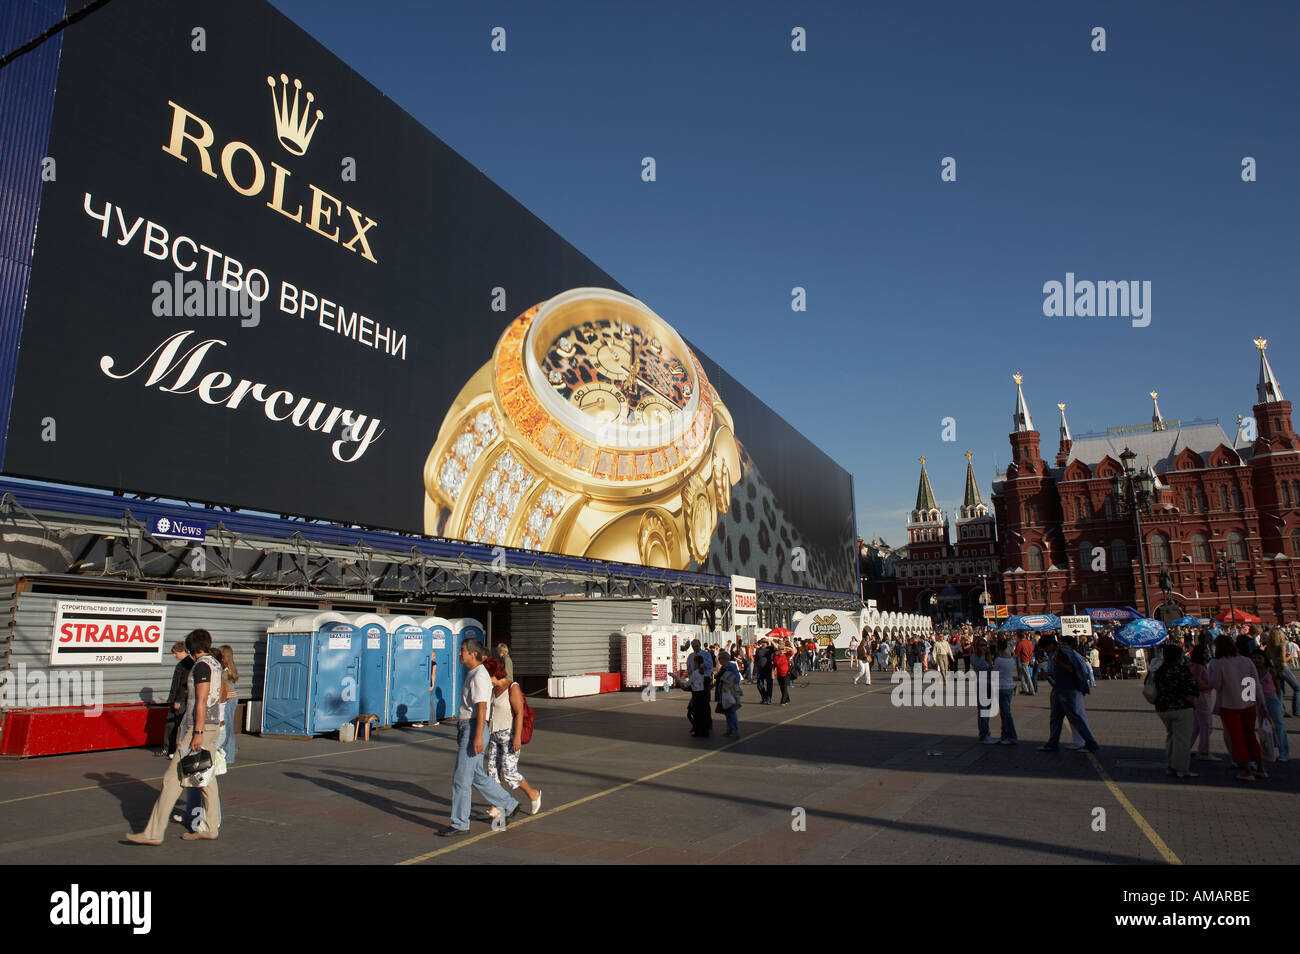 LARGE ROLEX WATCH ADVERTISEMENT AND CROWDS IN MANEZHNAYA SQUARE MOSCOW RUSSIA Stock Photo